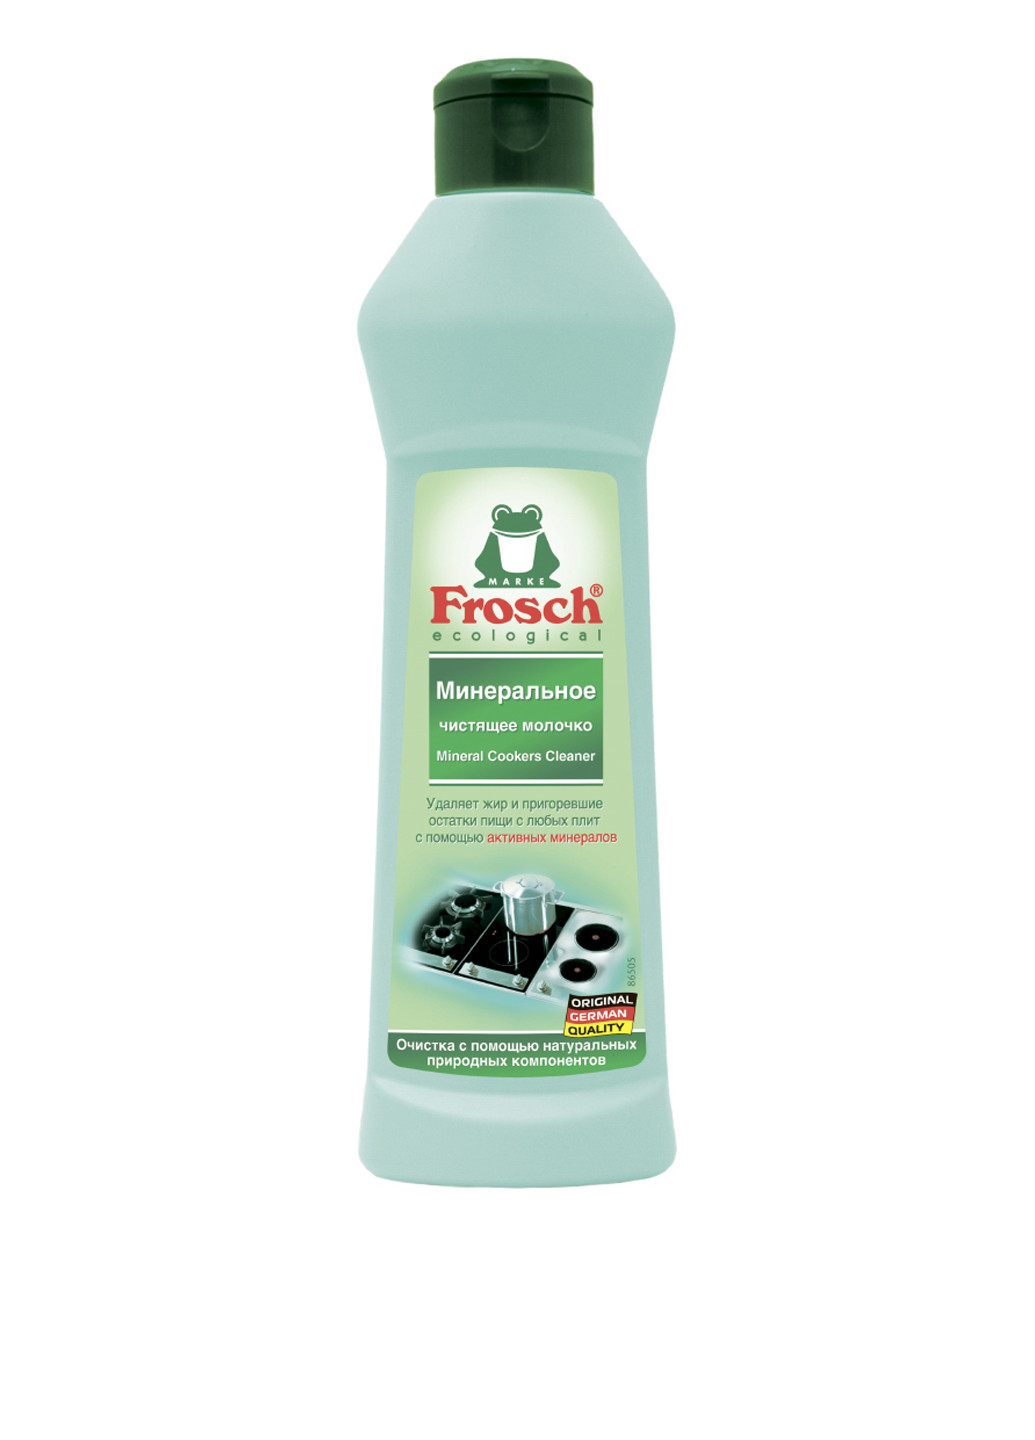 Чистящее молочко Сода Mineral Cookers Cleaners, 250 мл Frosch (89545014)